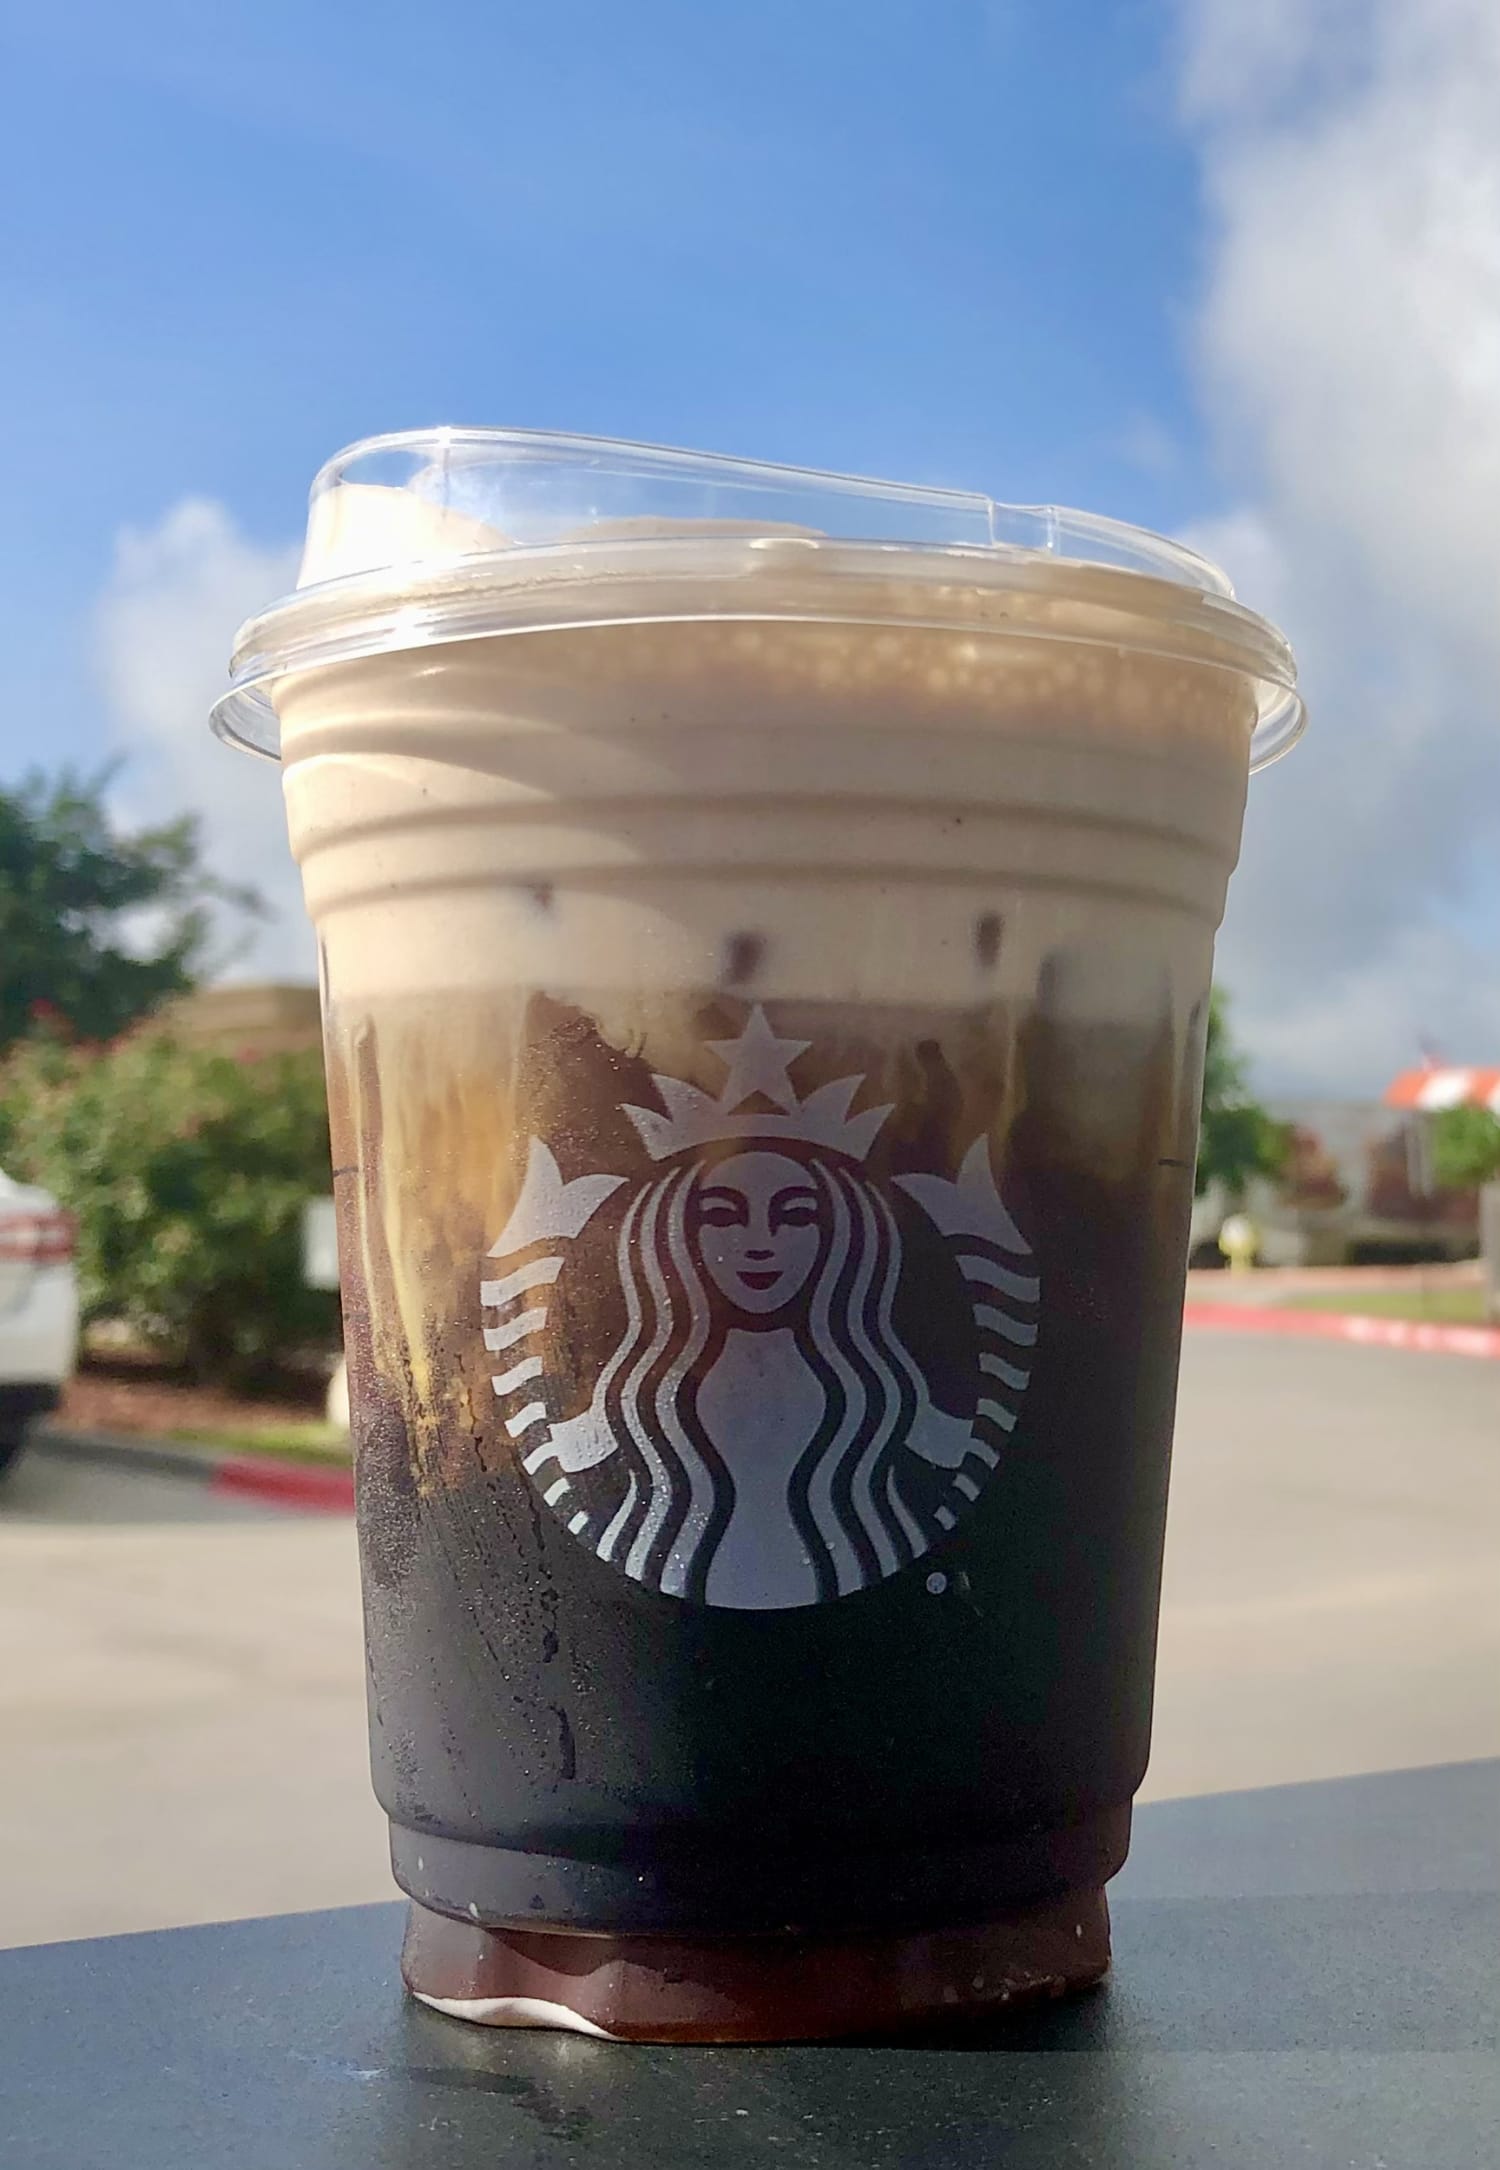 Starbucks Best Iced Coffee Review